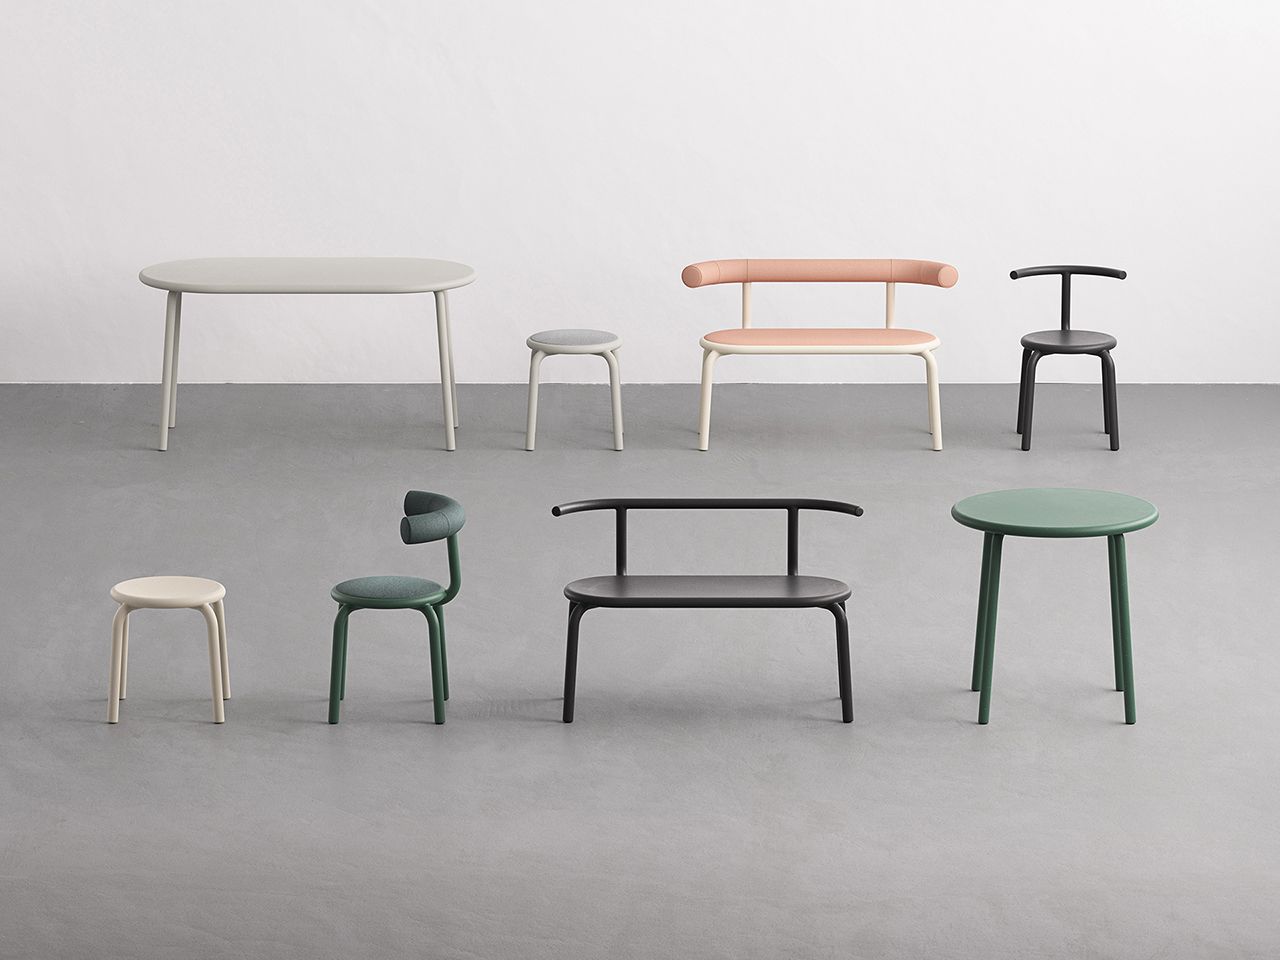 +Halle Torno Chair Hospitality Seating